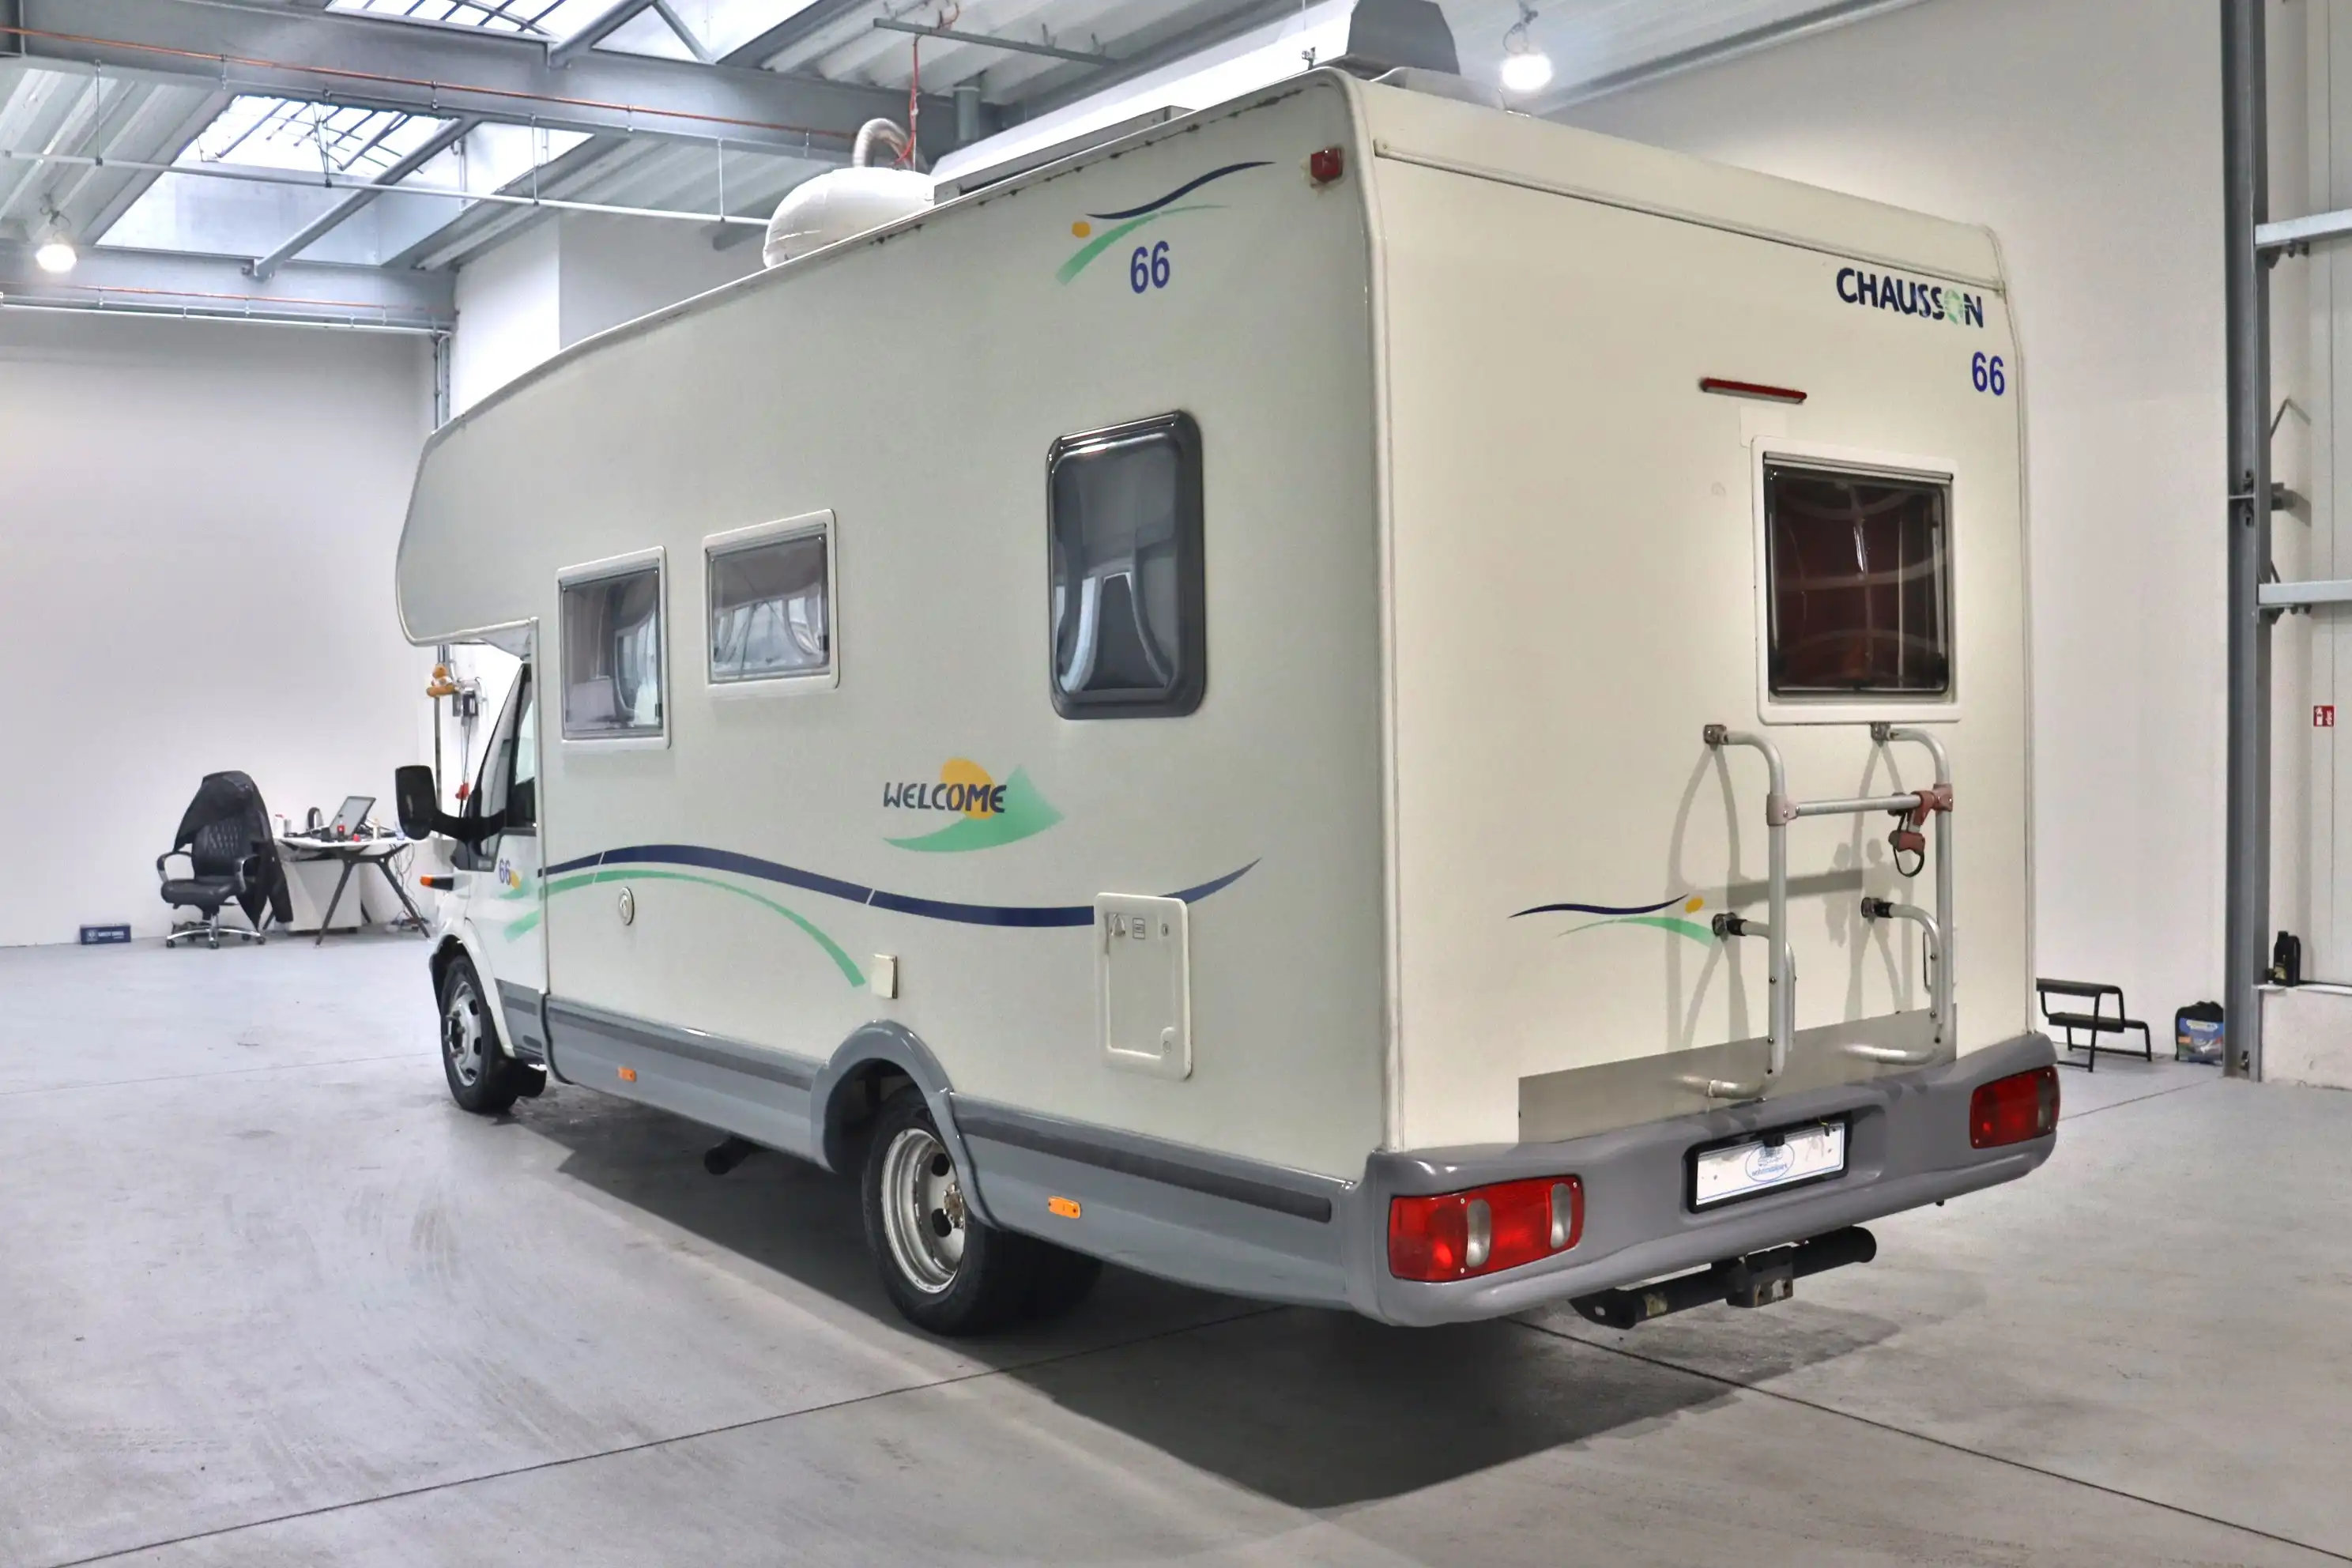 CHAUSSON Welcome 66